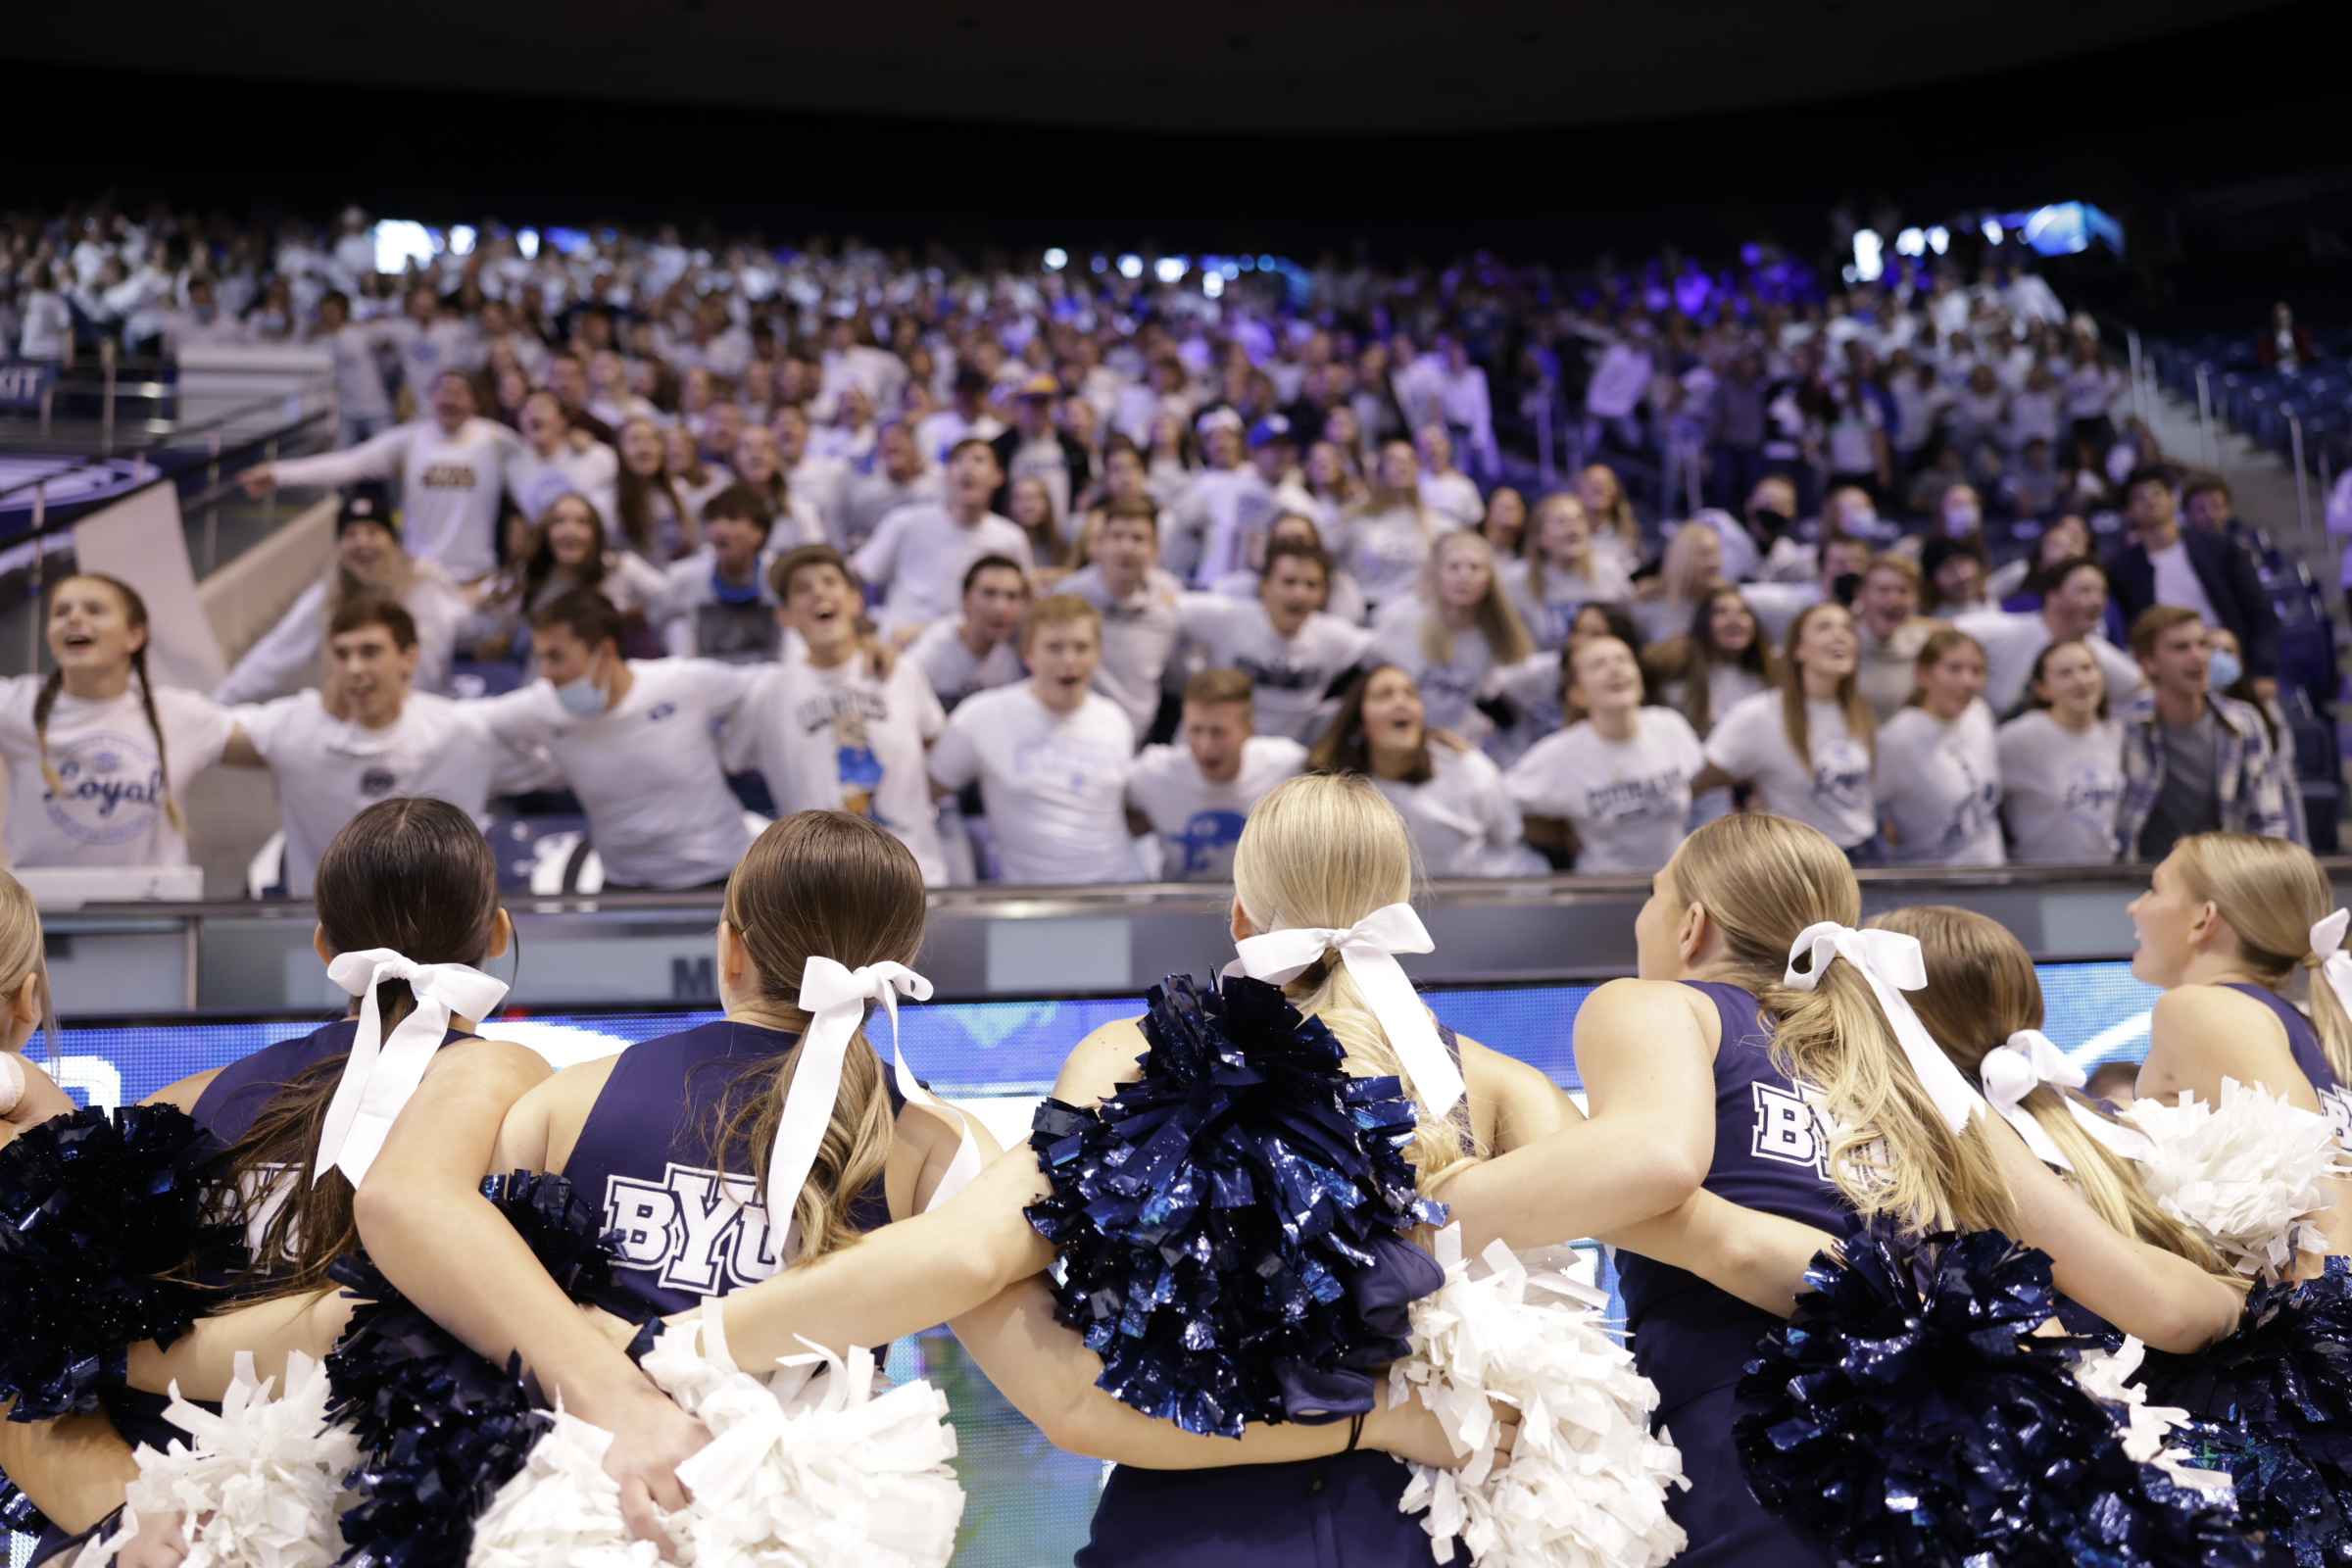 The BYU ROC cheer on the Cougars in the first home game of the 2021-22 season.